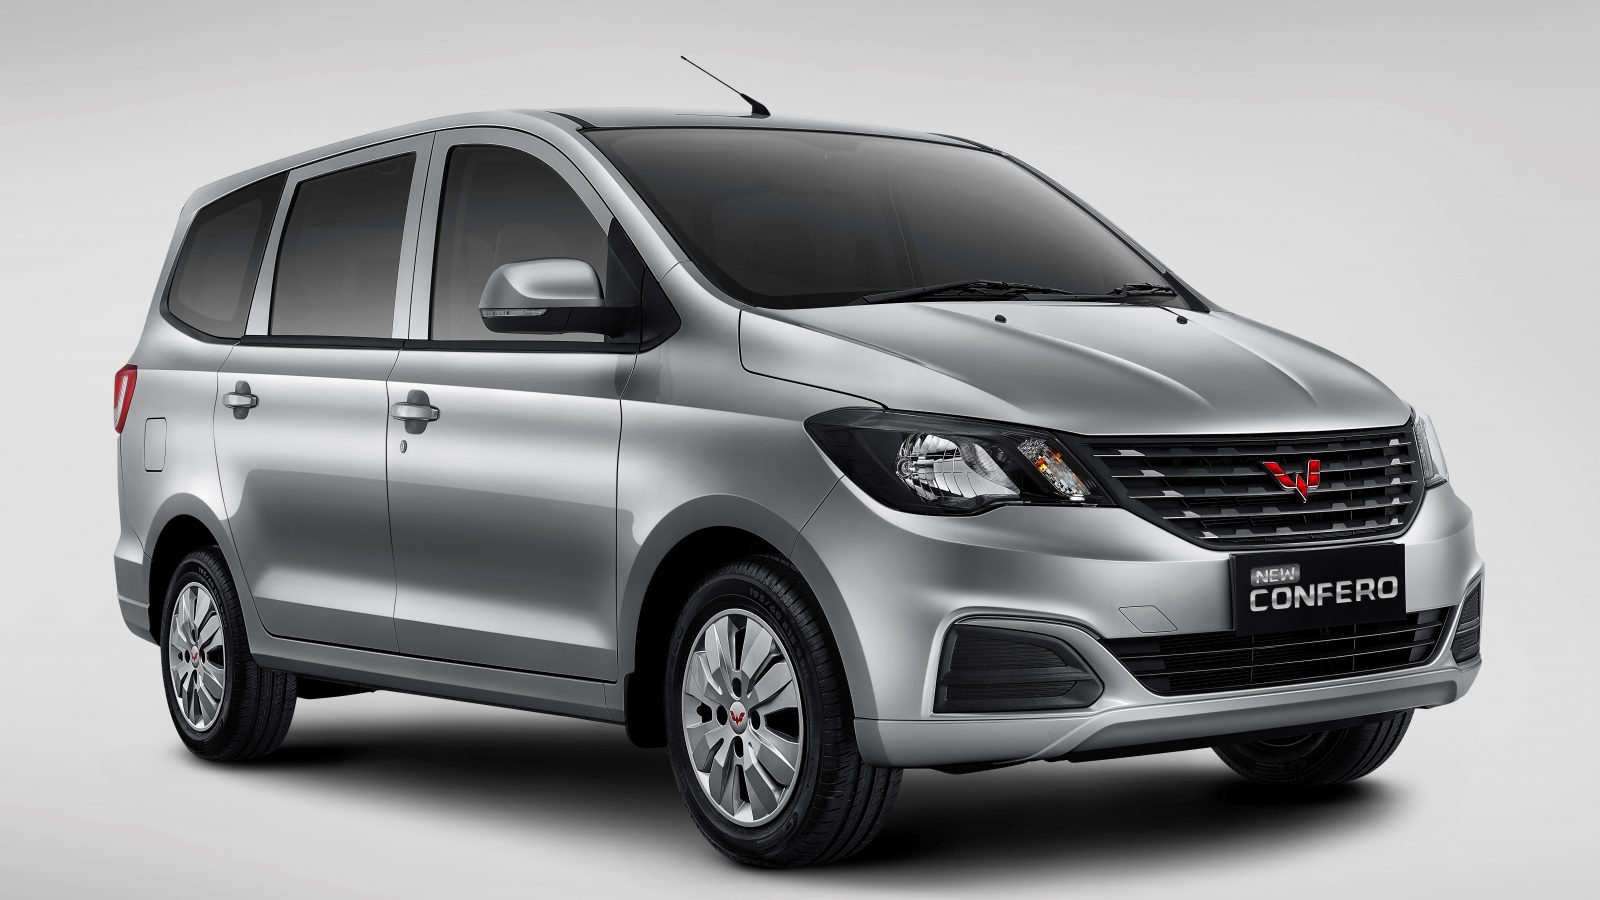 Image Wuling Presents New Confero with PPnBM Incentives in June